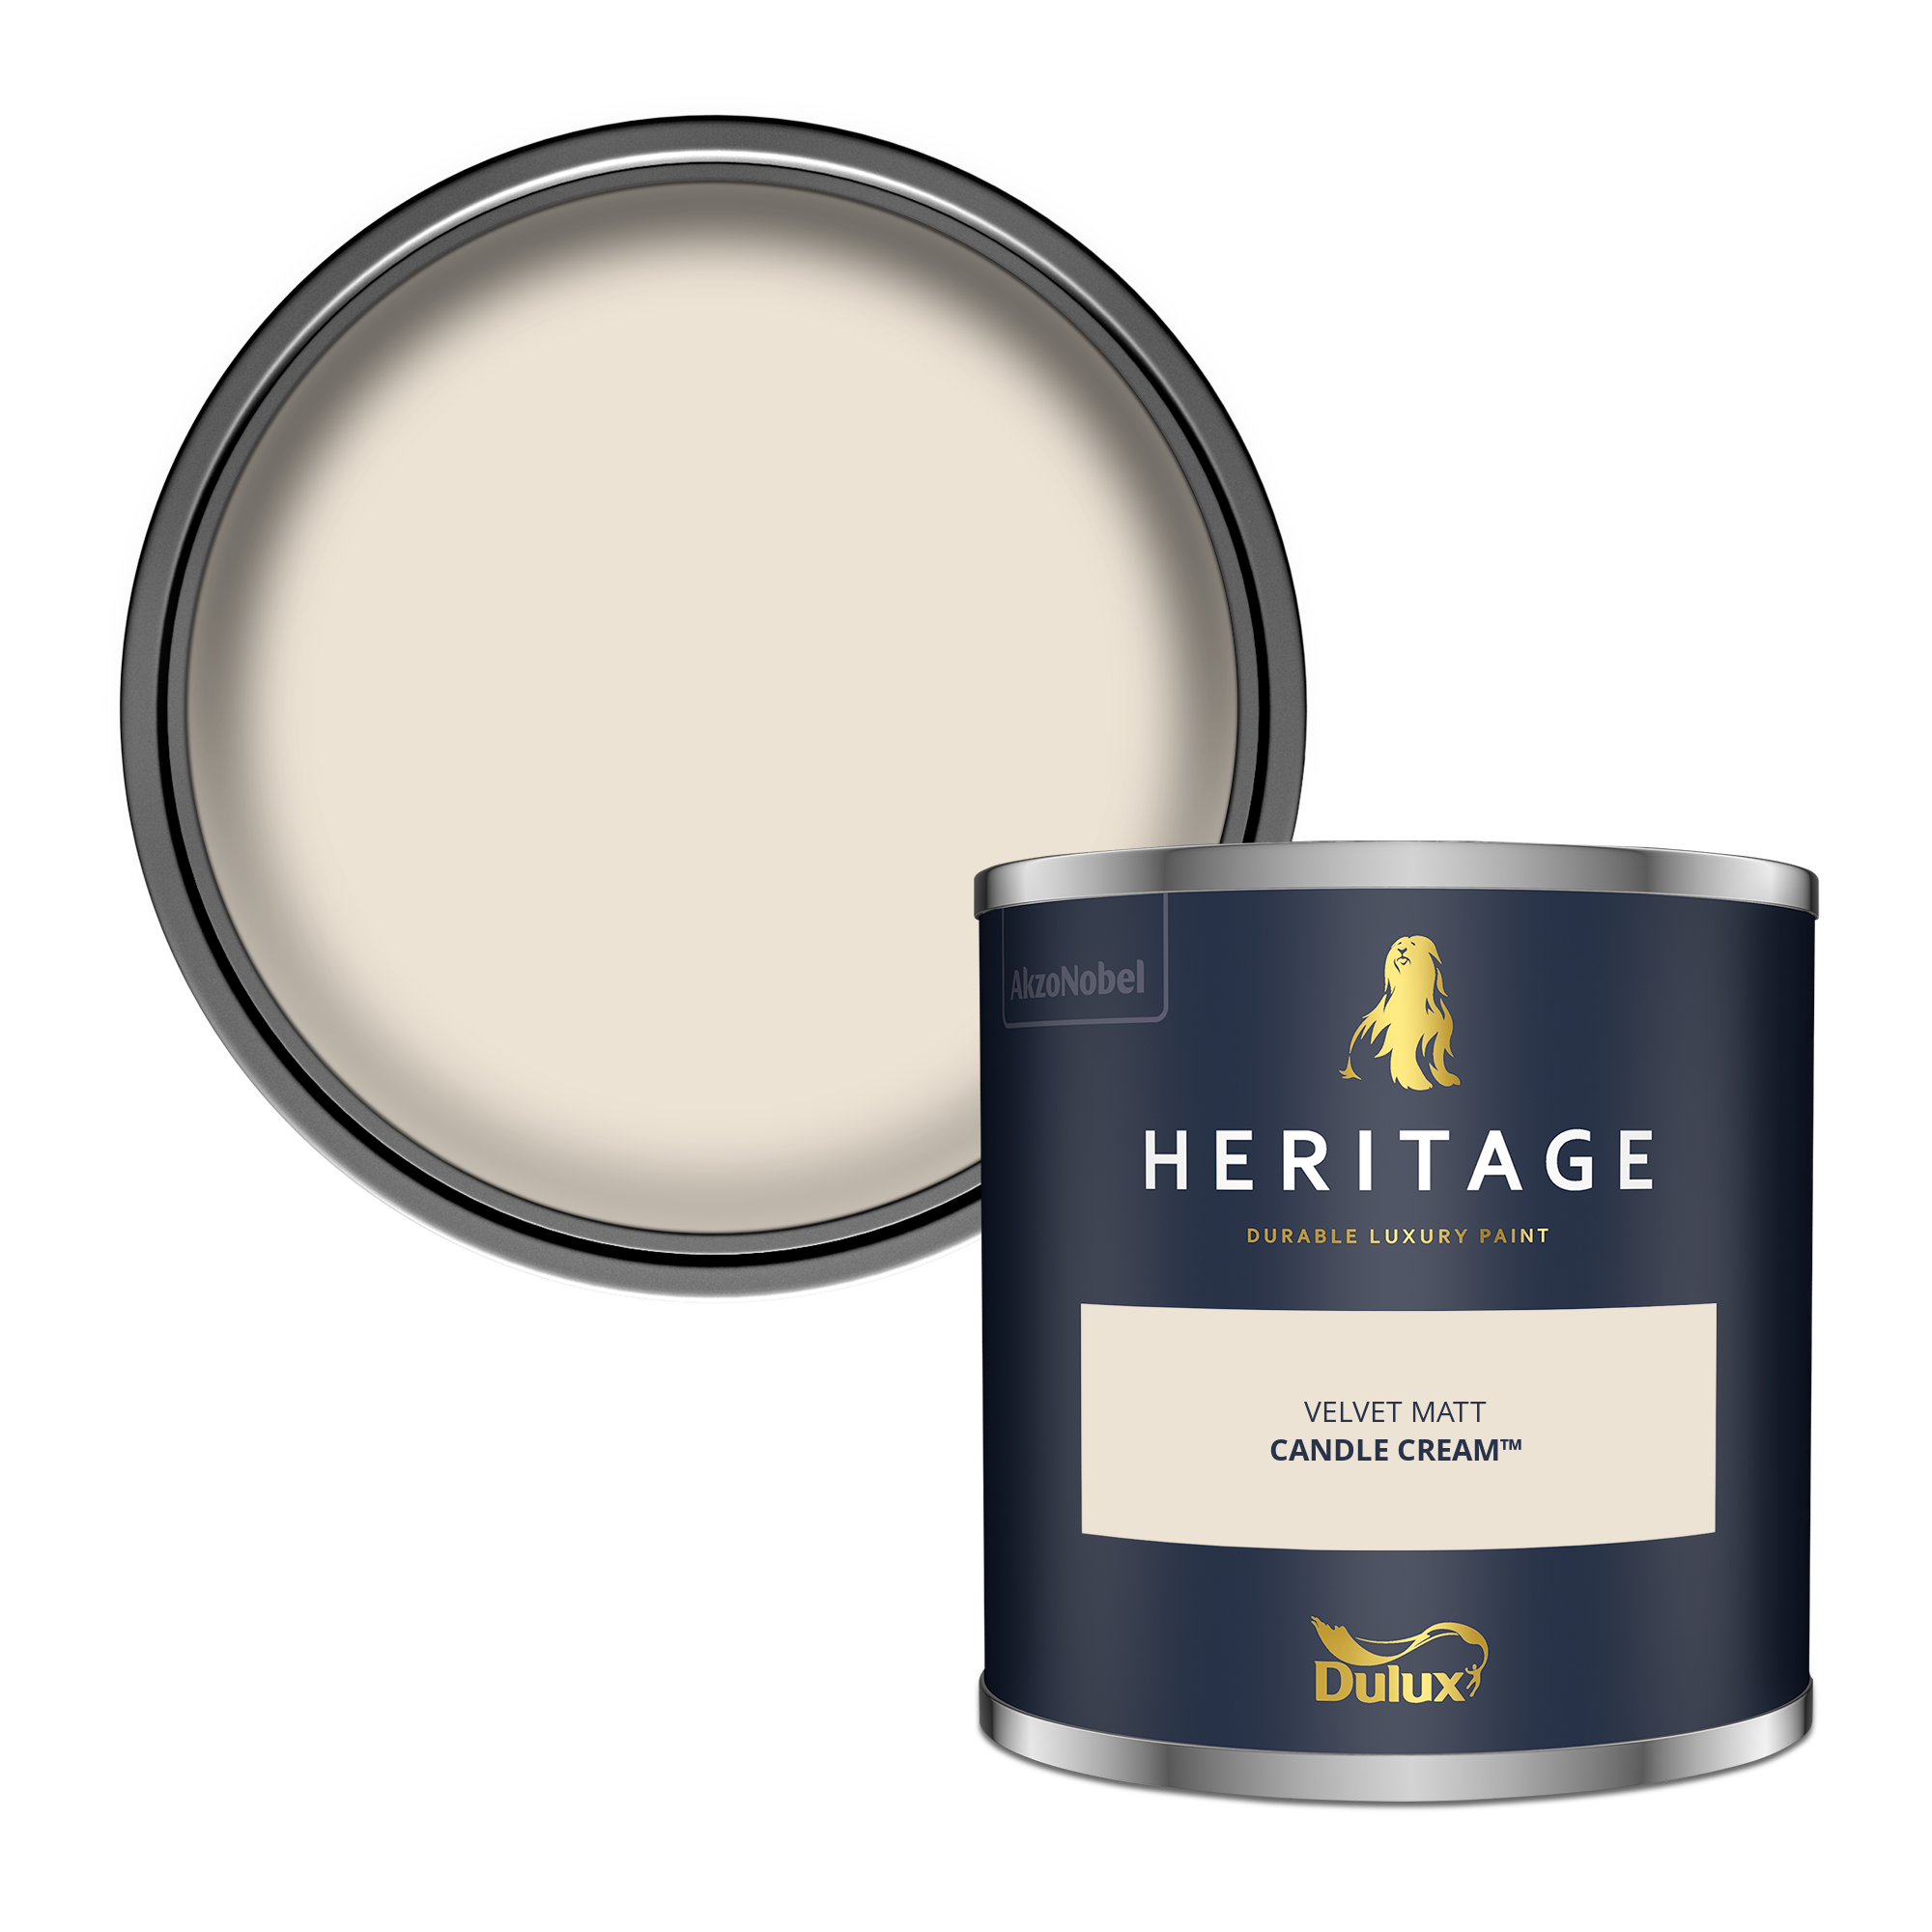 Dulux Heritage Tester Candle Cream 125ml